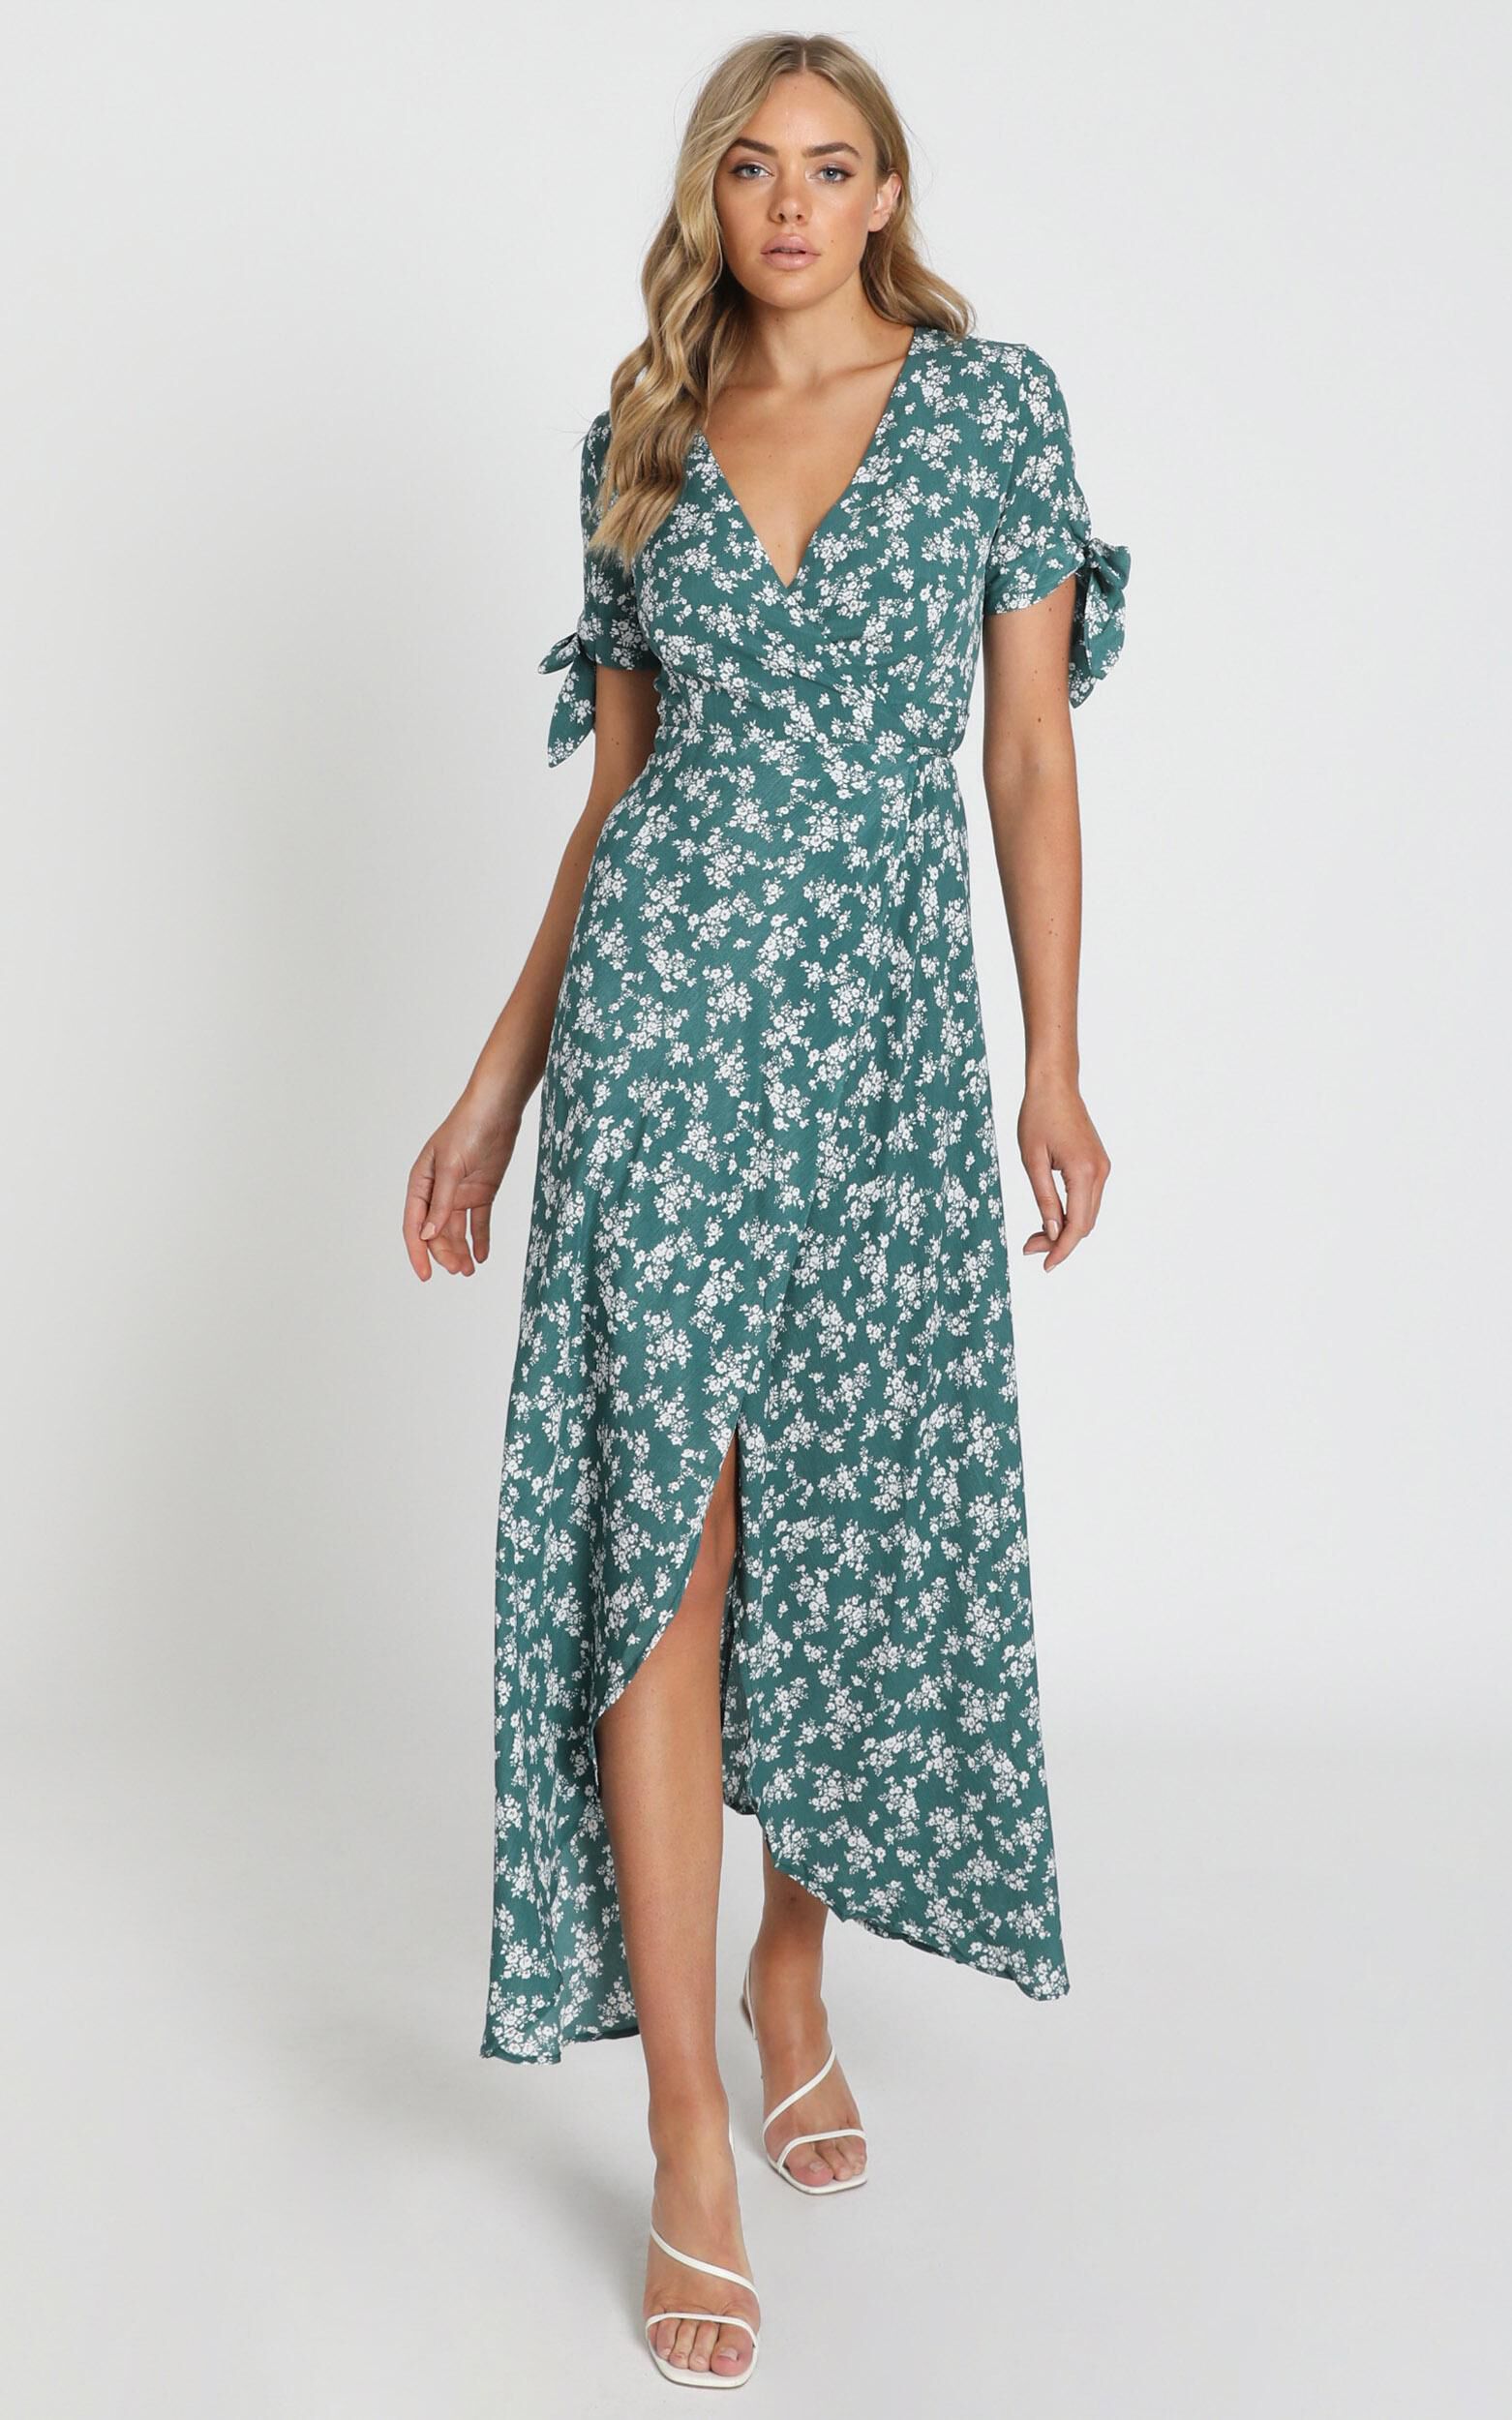 Teal Wrap Dress Outlet Shop, UP TO 58% OFF | www.aramanatural.es